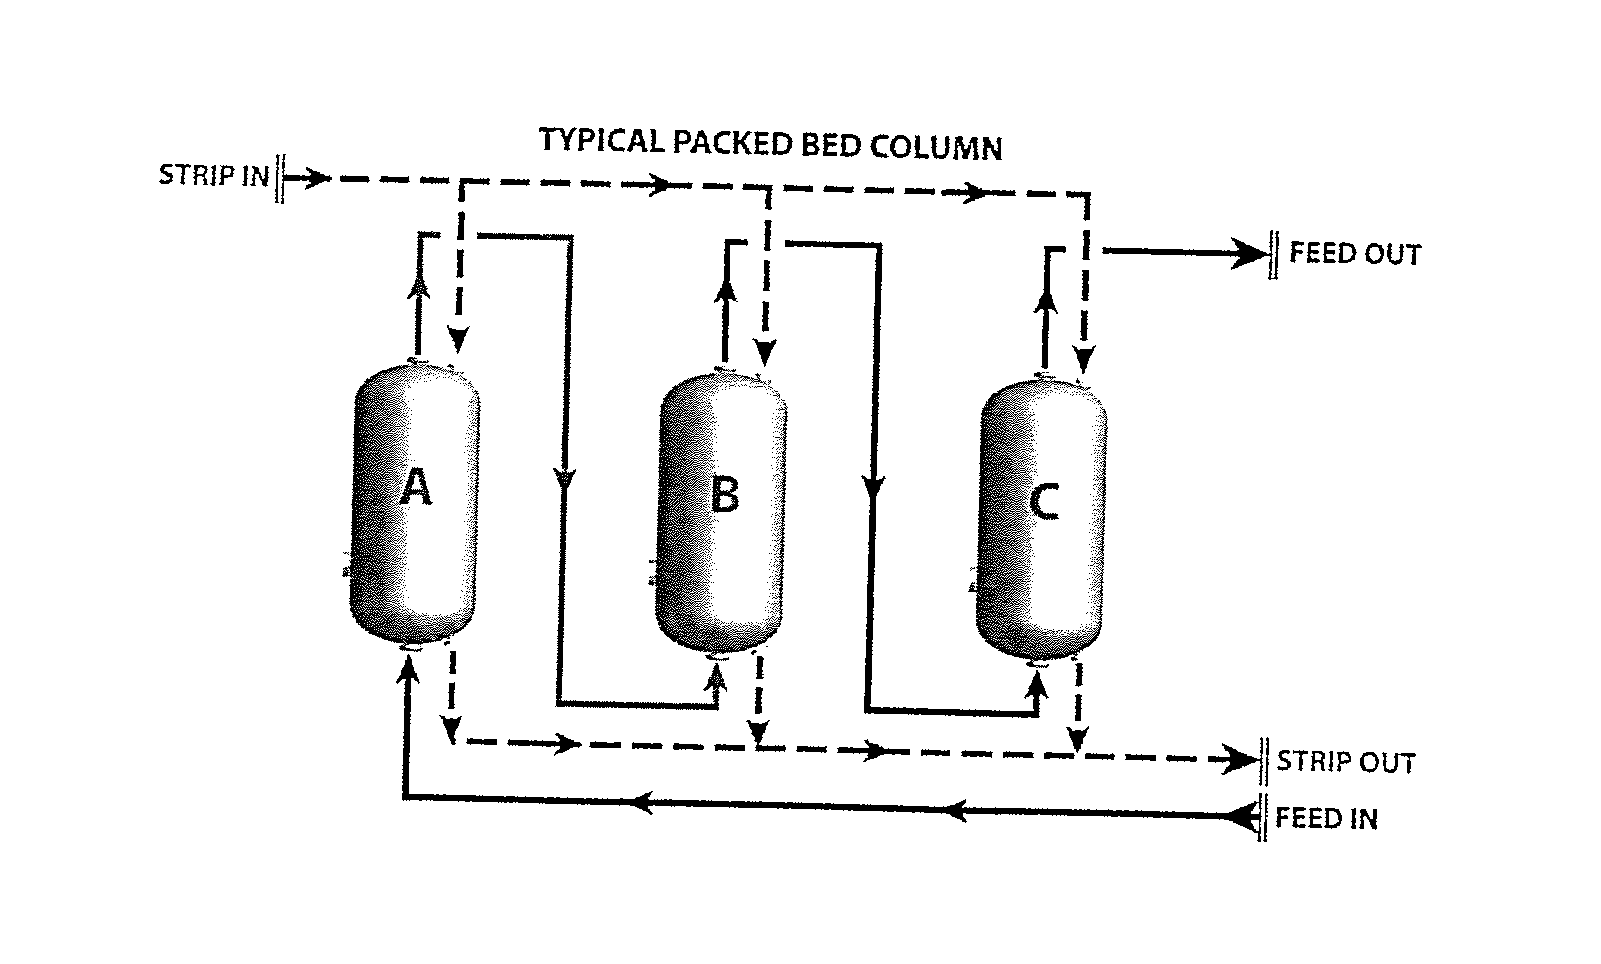 Non-Oxidized Desulfurization Process and Method of Using the Same